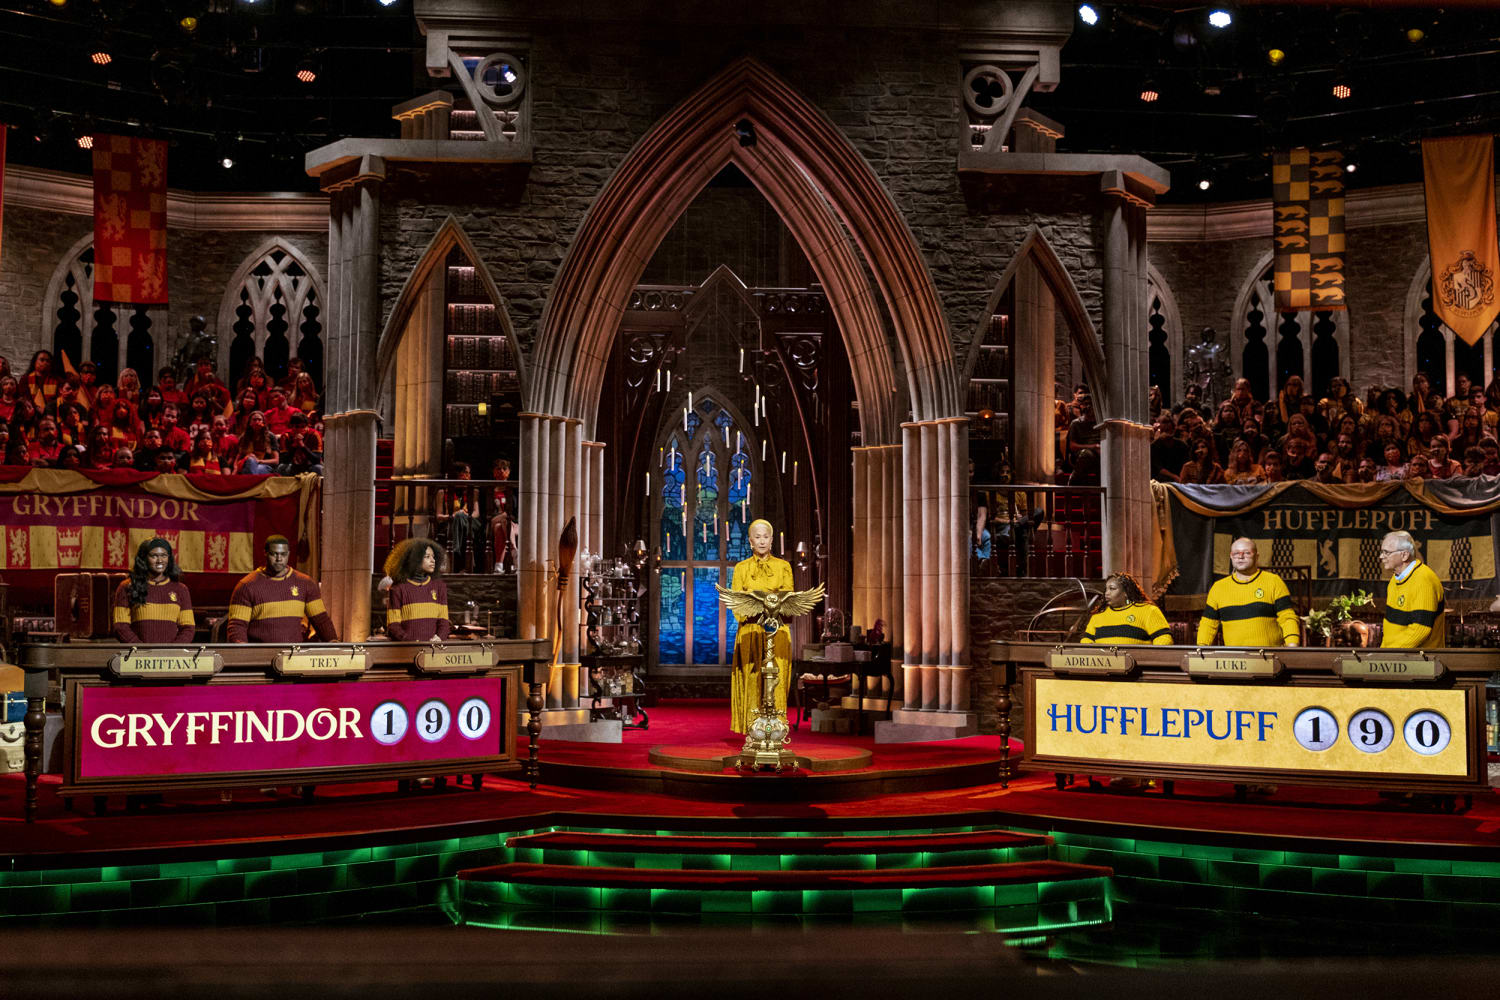 Harry Potter quiz show may stump even the biggest fans